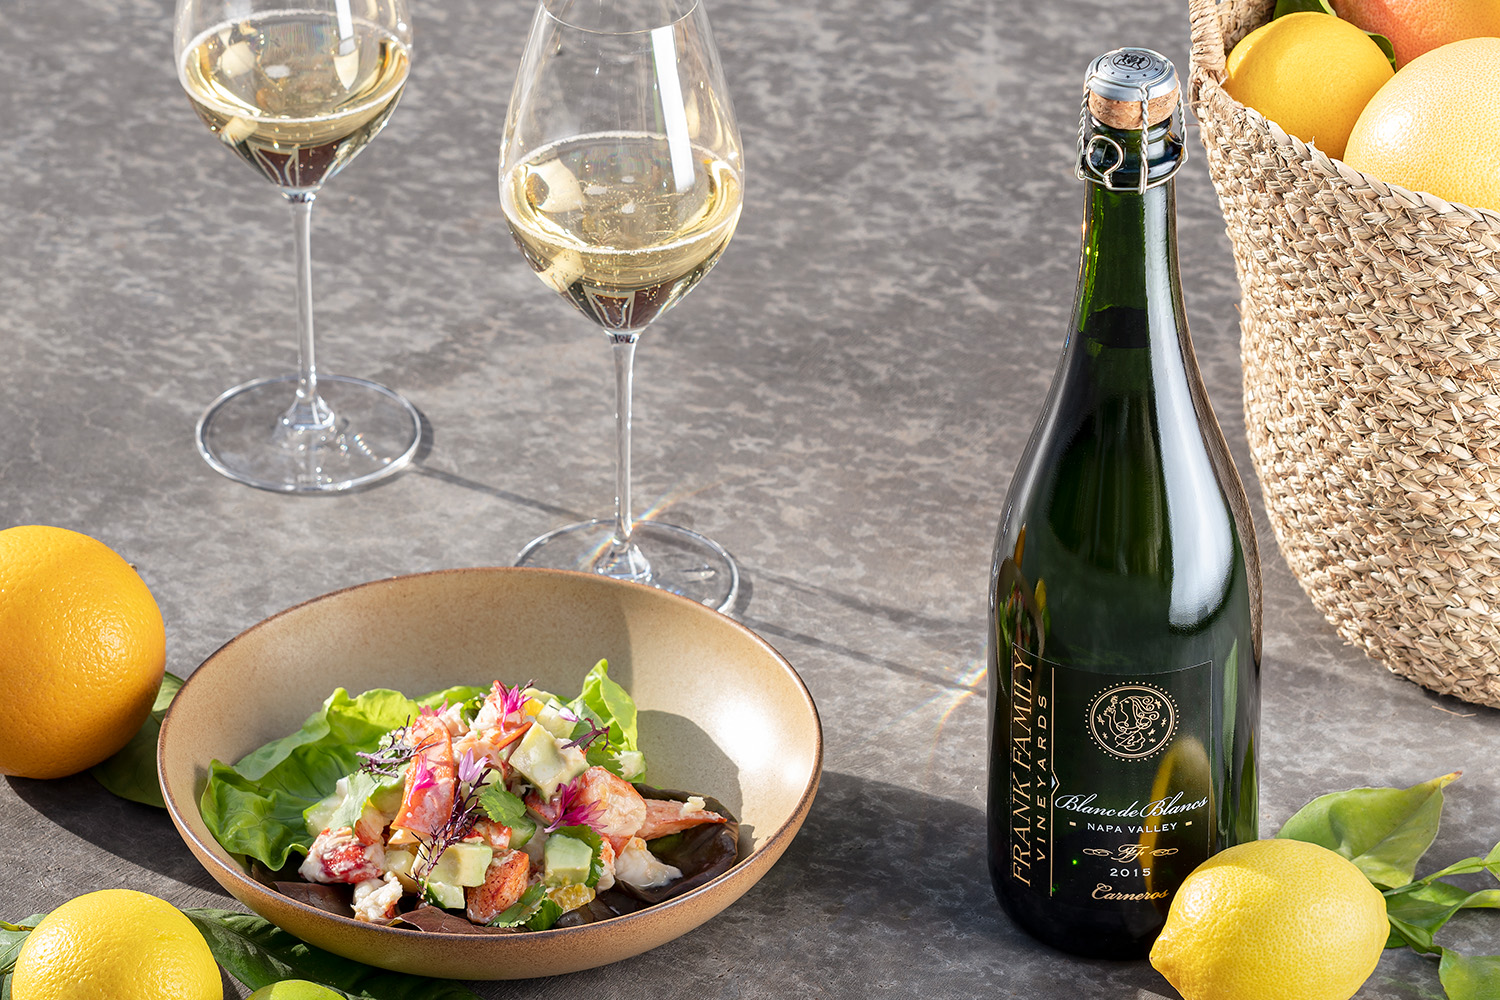 Lobster and citrus salad with a bottle of Frank Family's Blanc de Blancs 